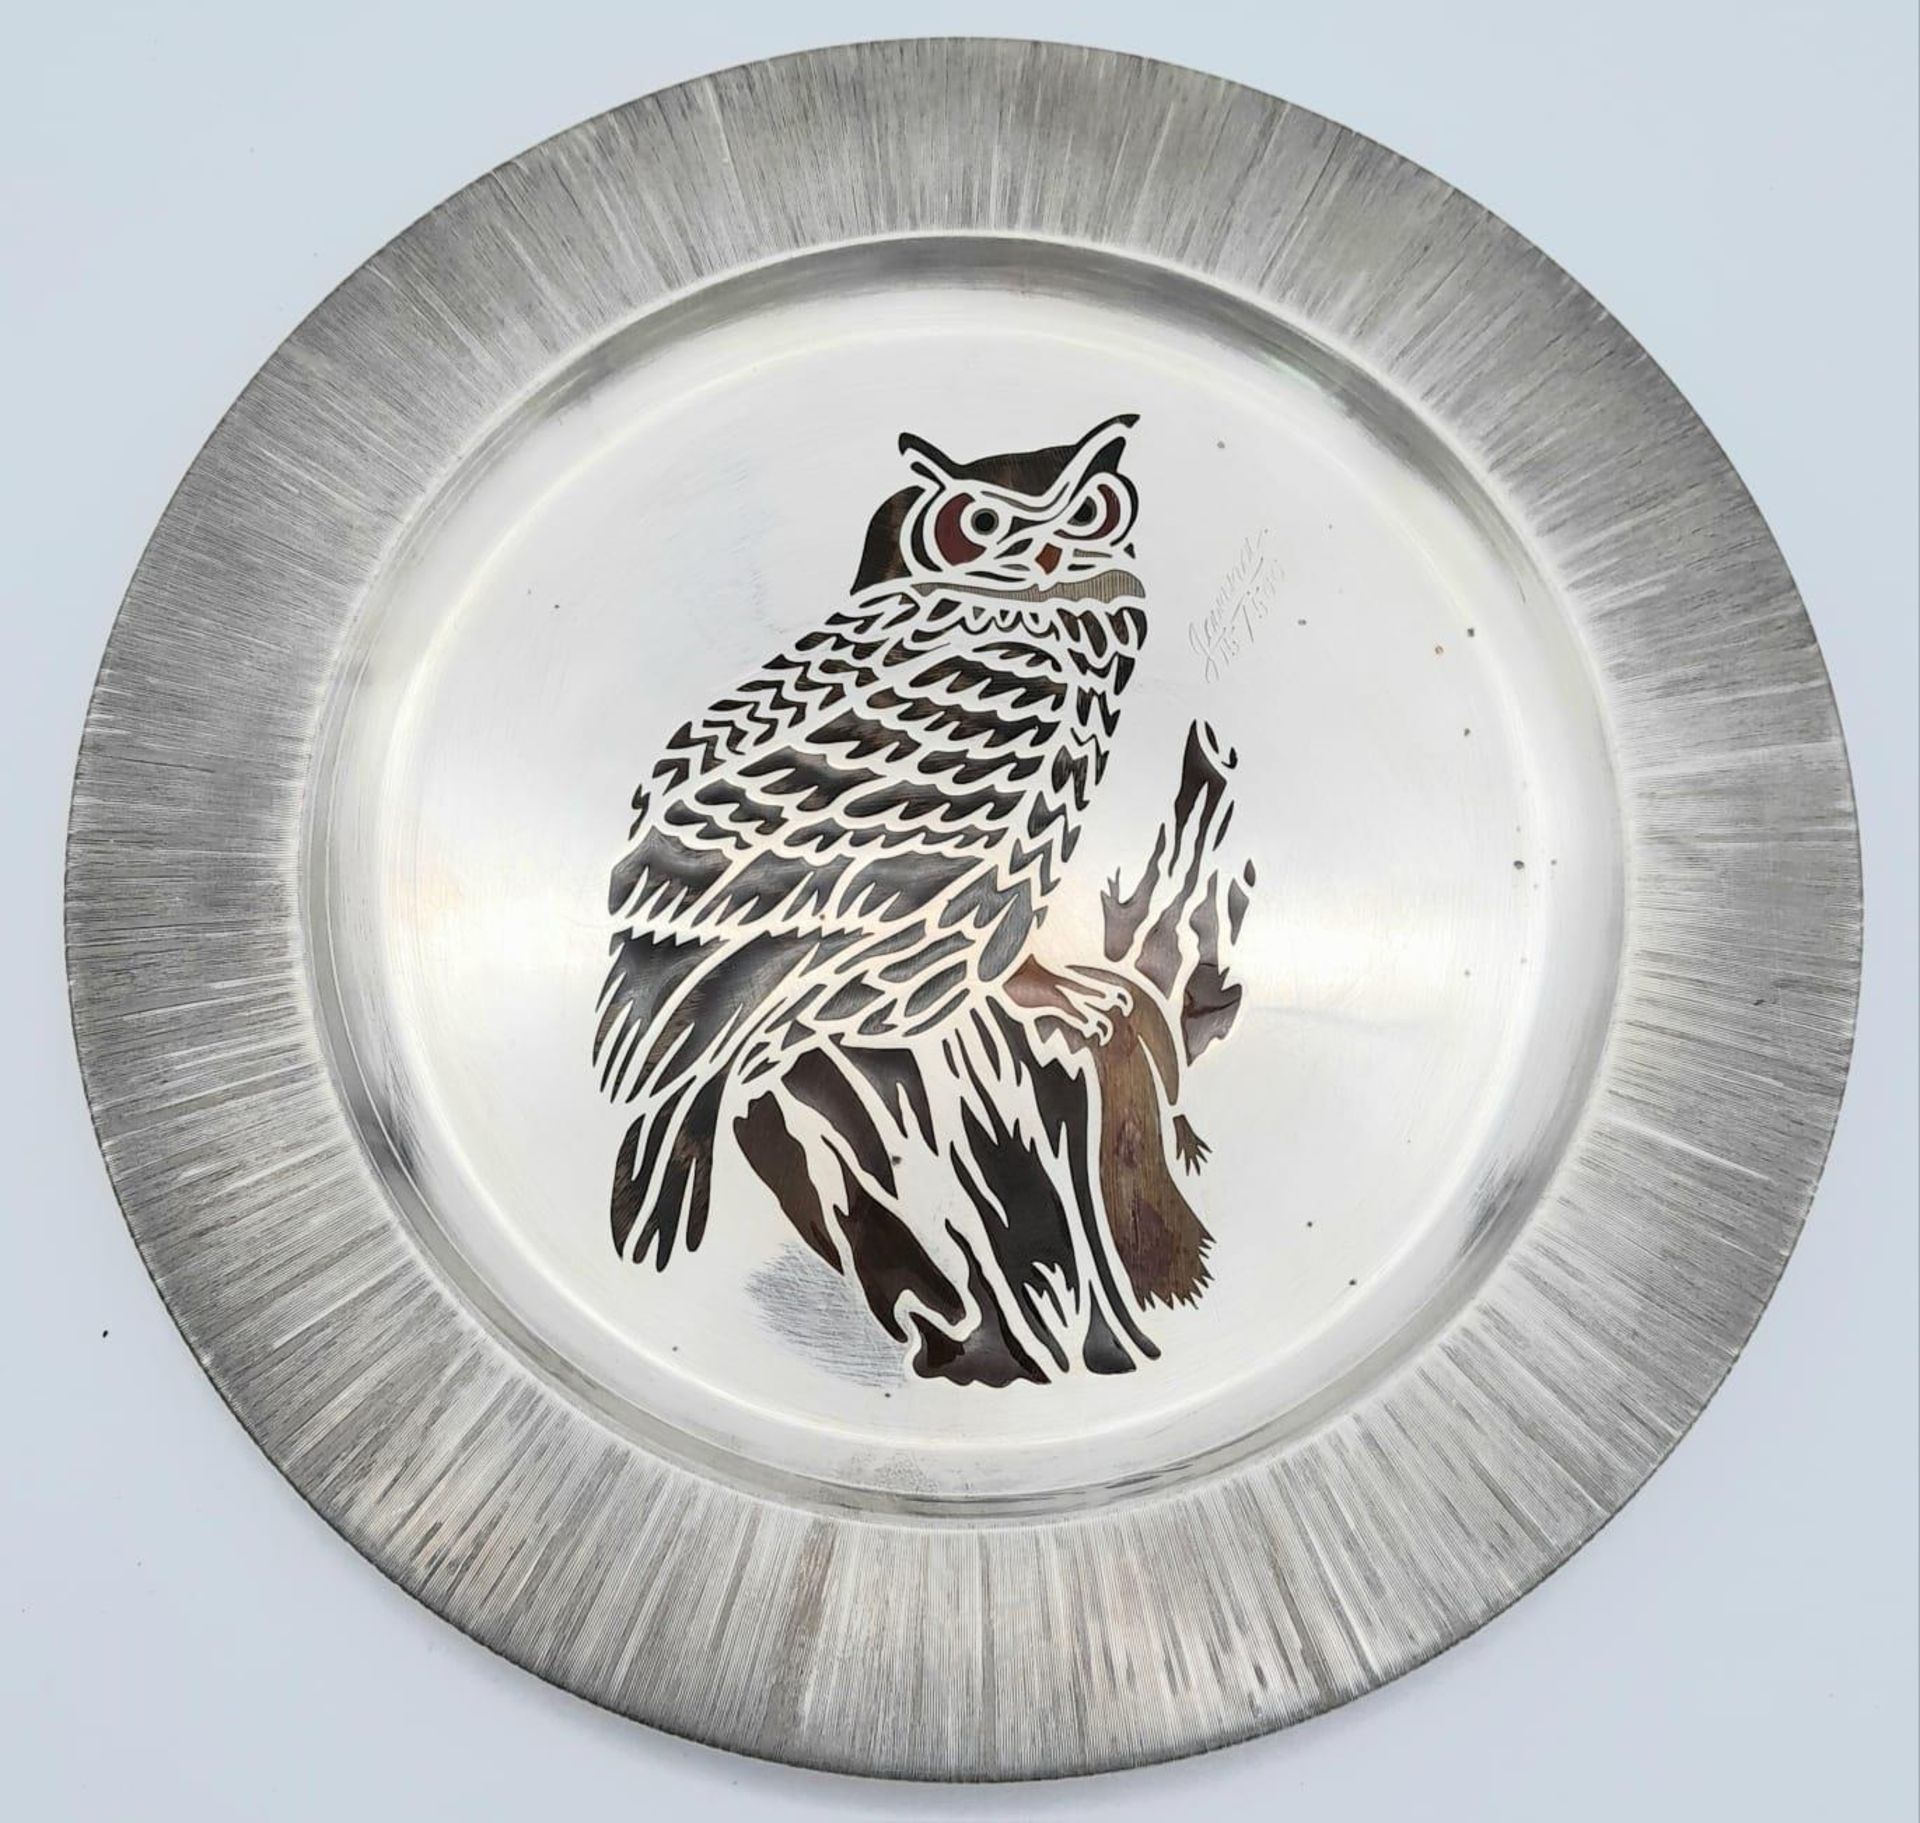 A Handmade Vintage Sterling Silver Limited Edition (15/500) Decorative Owl Plate. Brilliantly